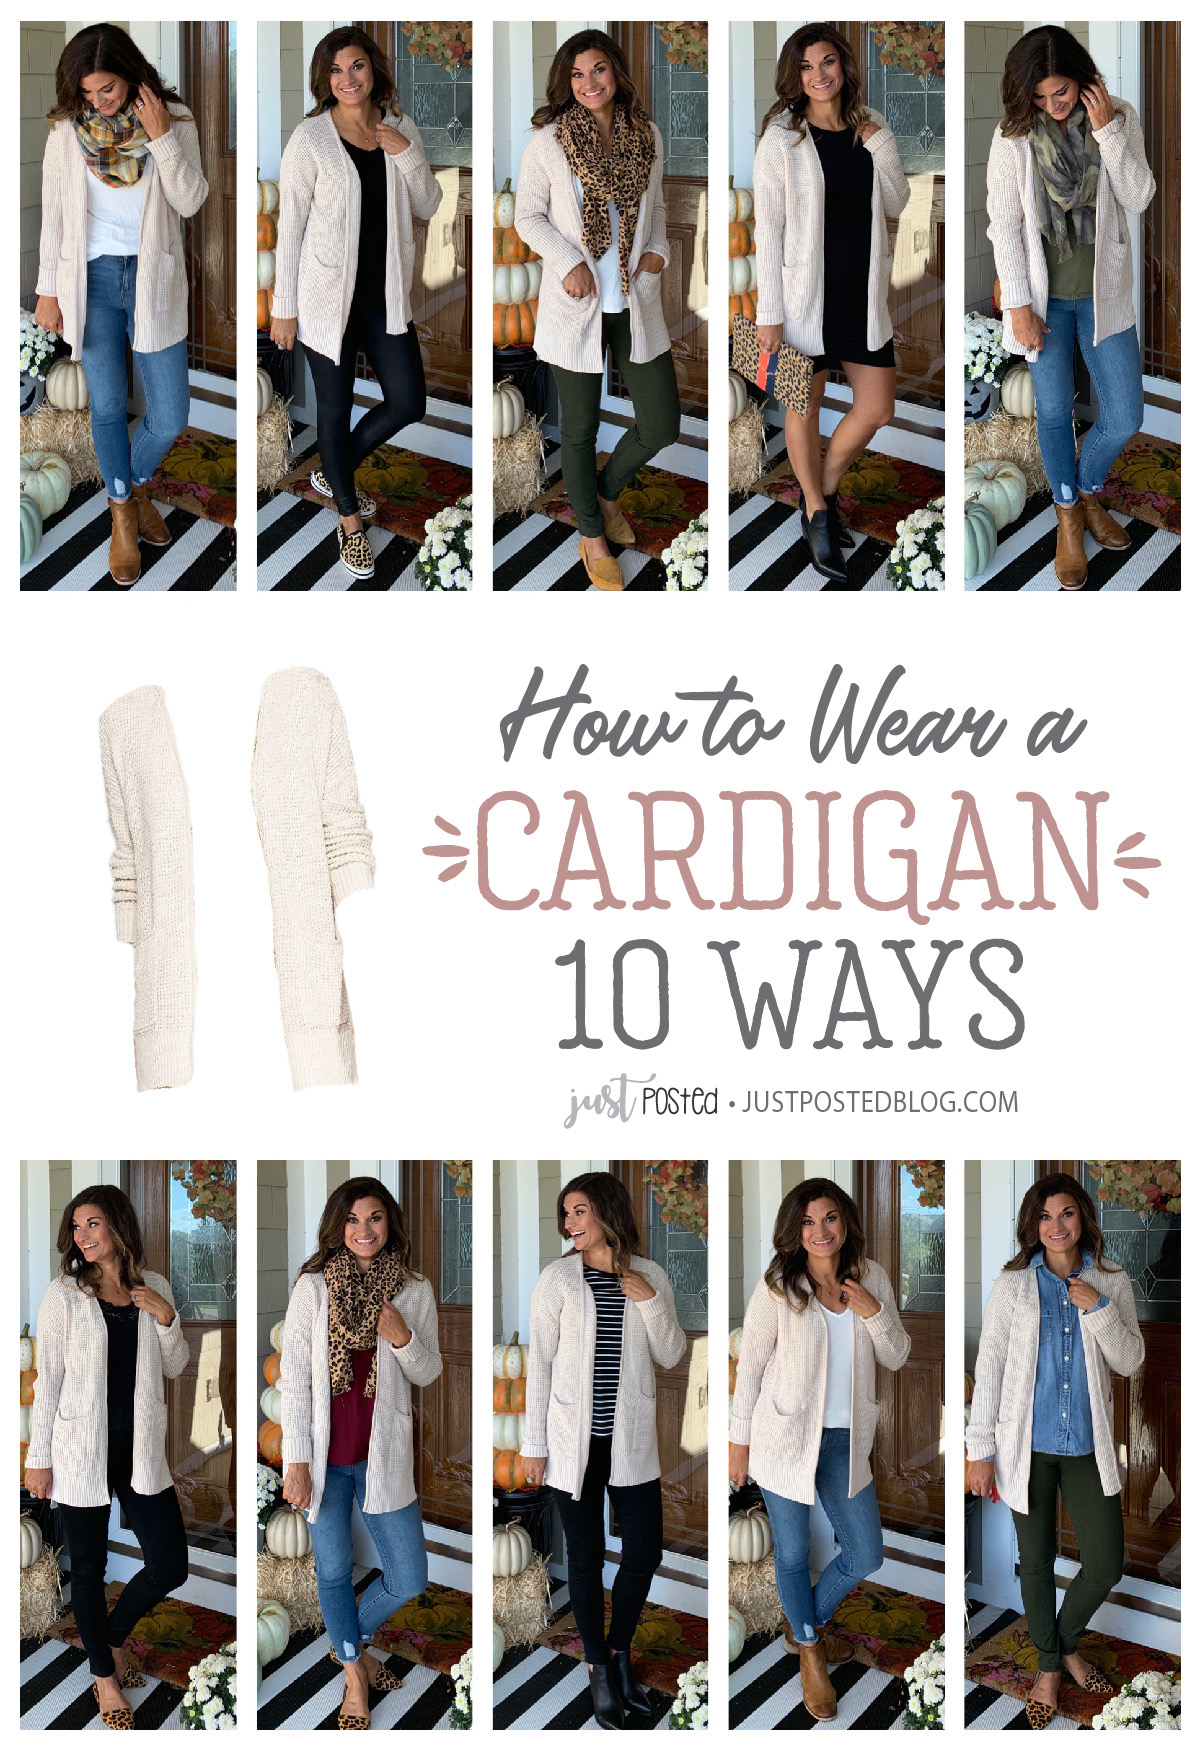 How to Wear a Cardigan – Just Posted